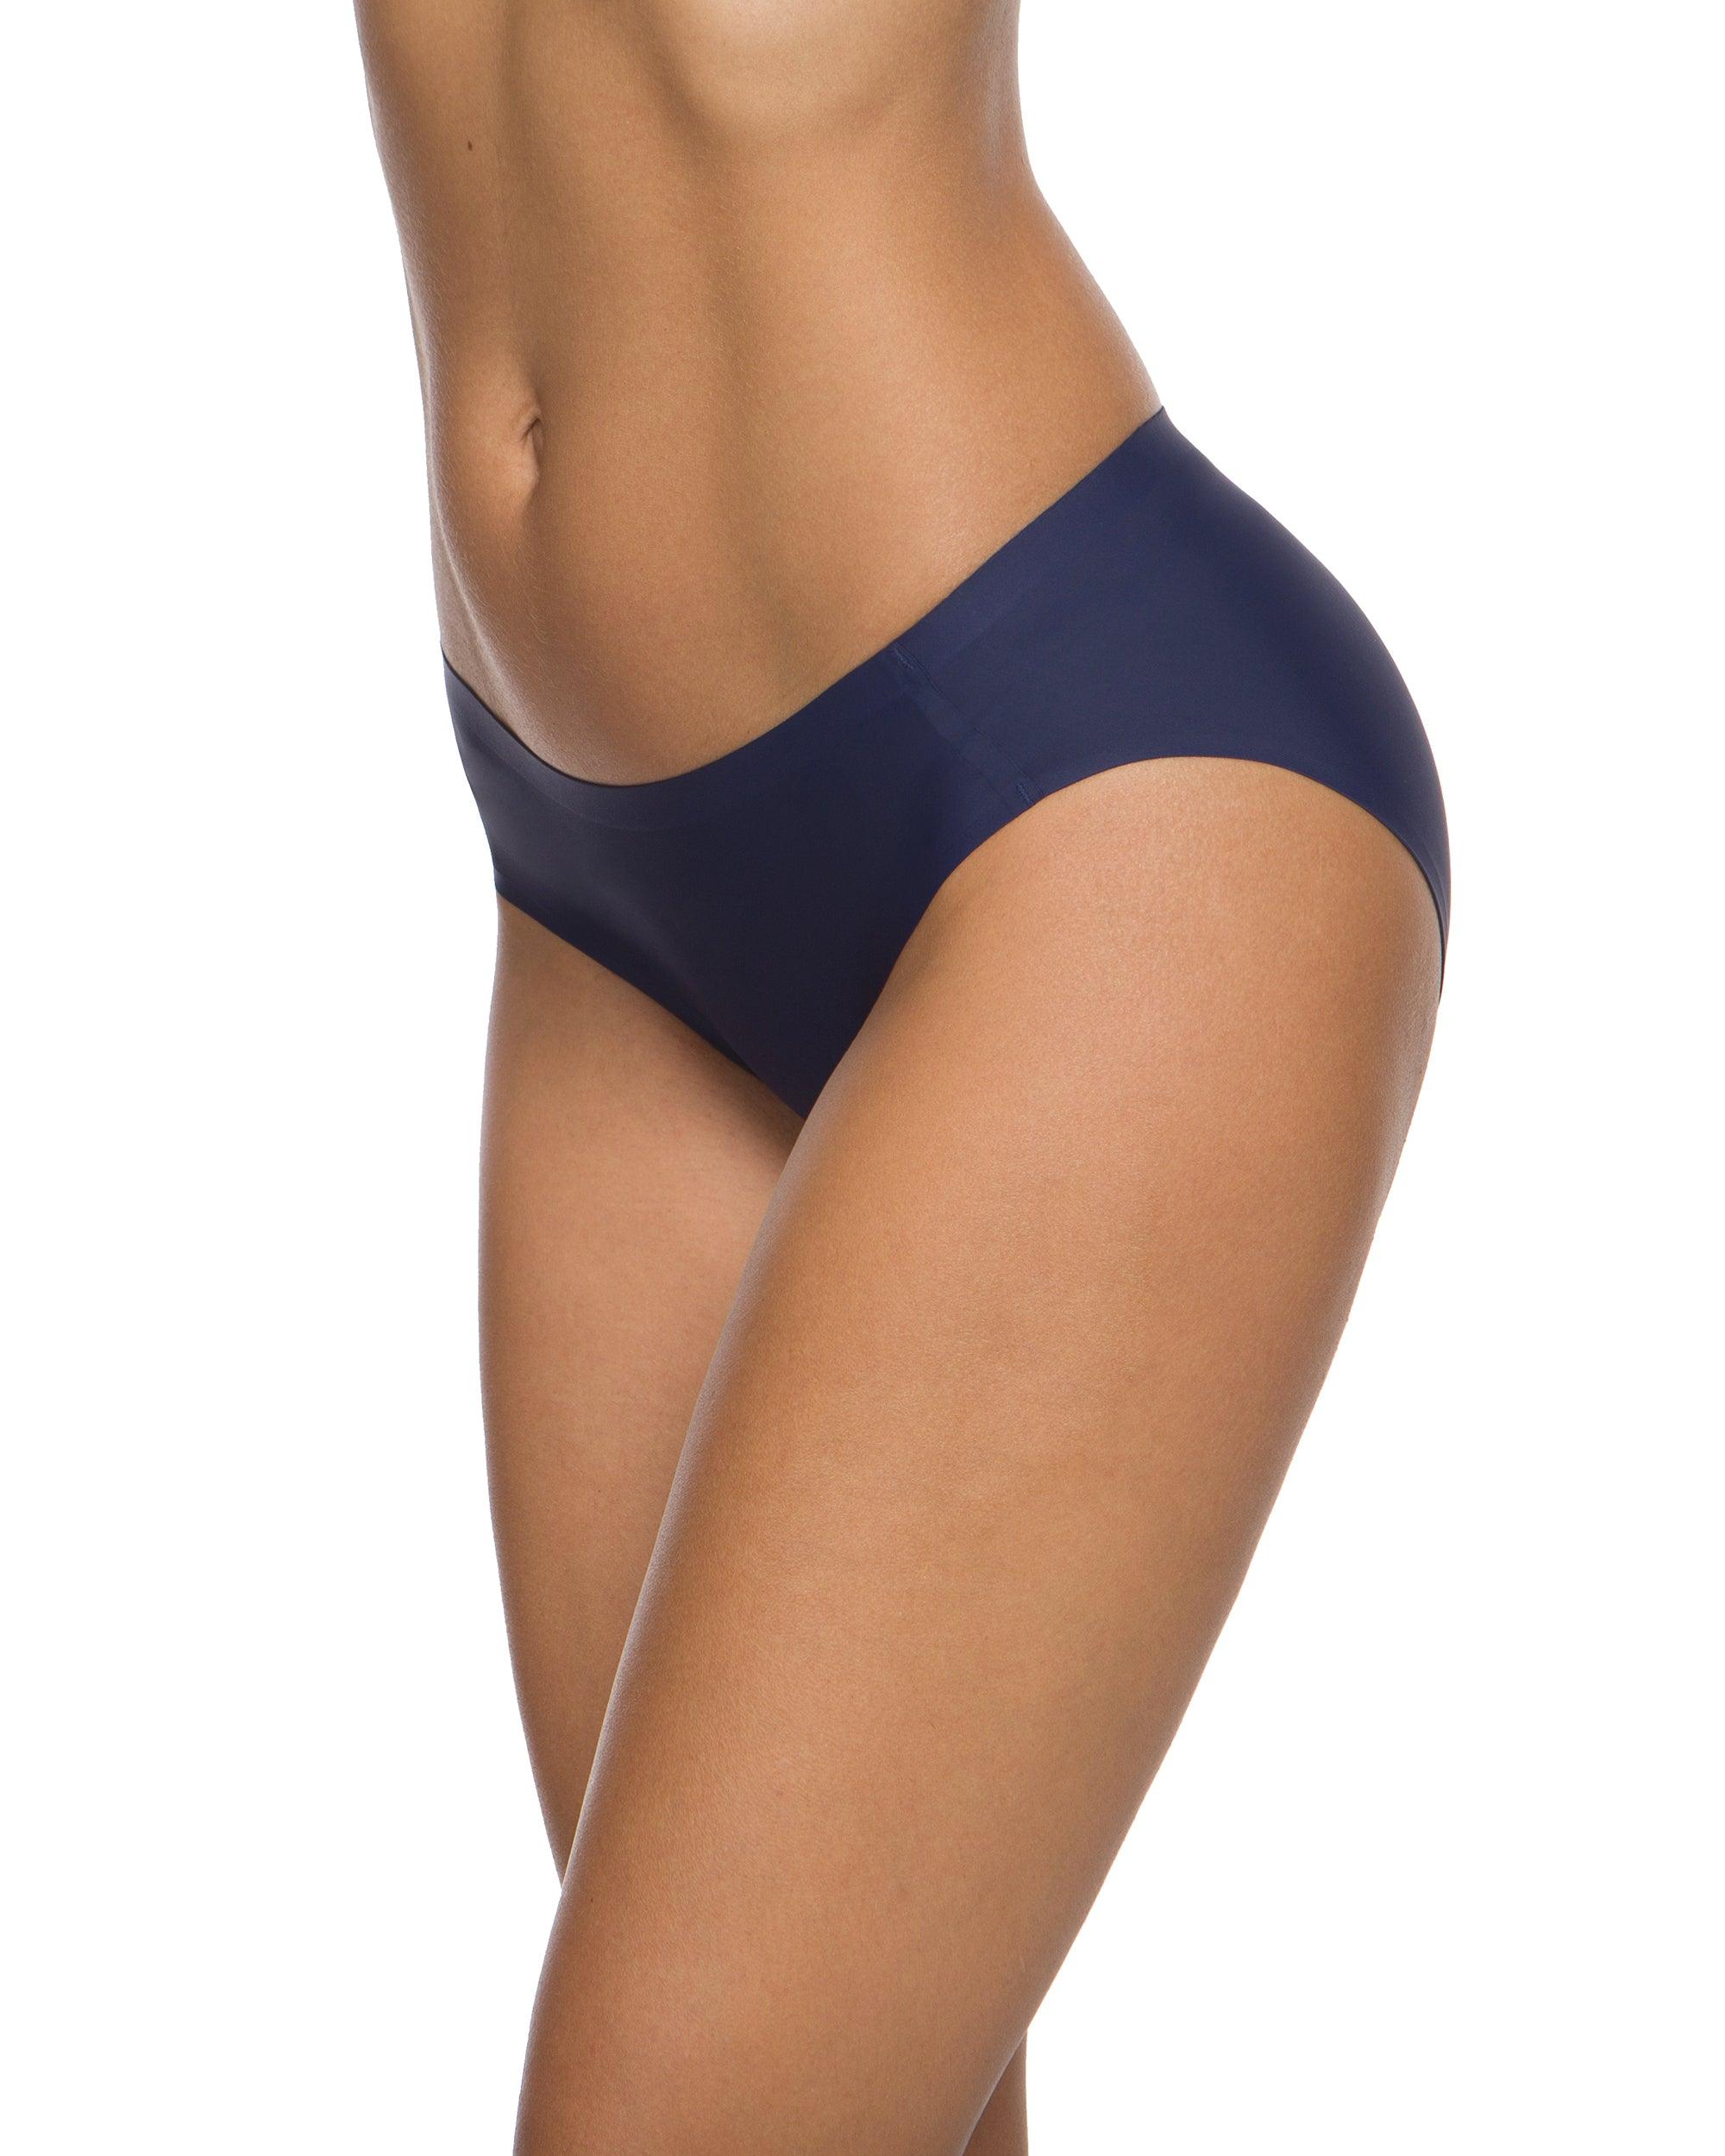 ALTHEANRAY Women’s Seamless Hipster-color 13